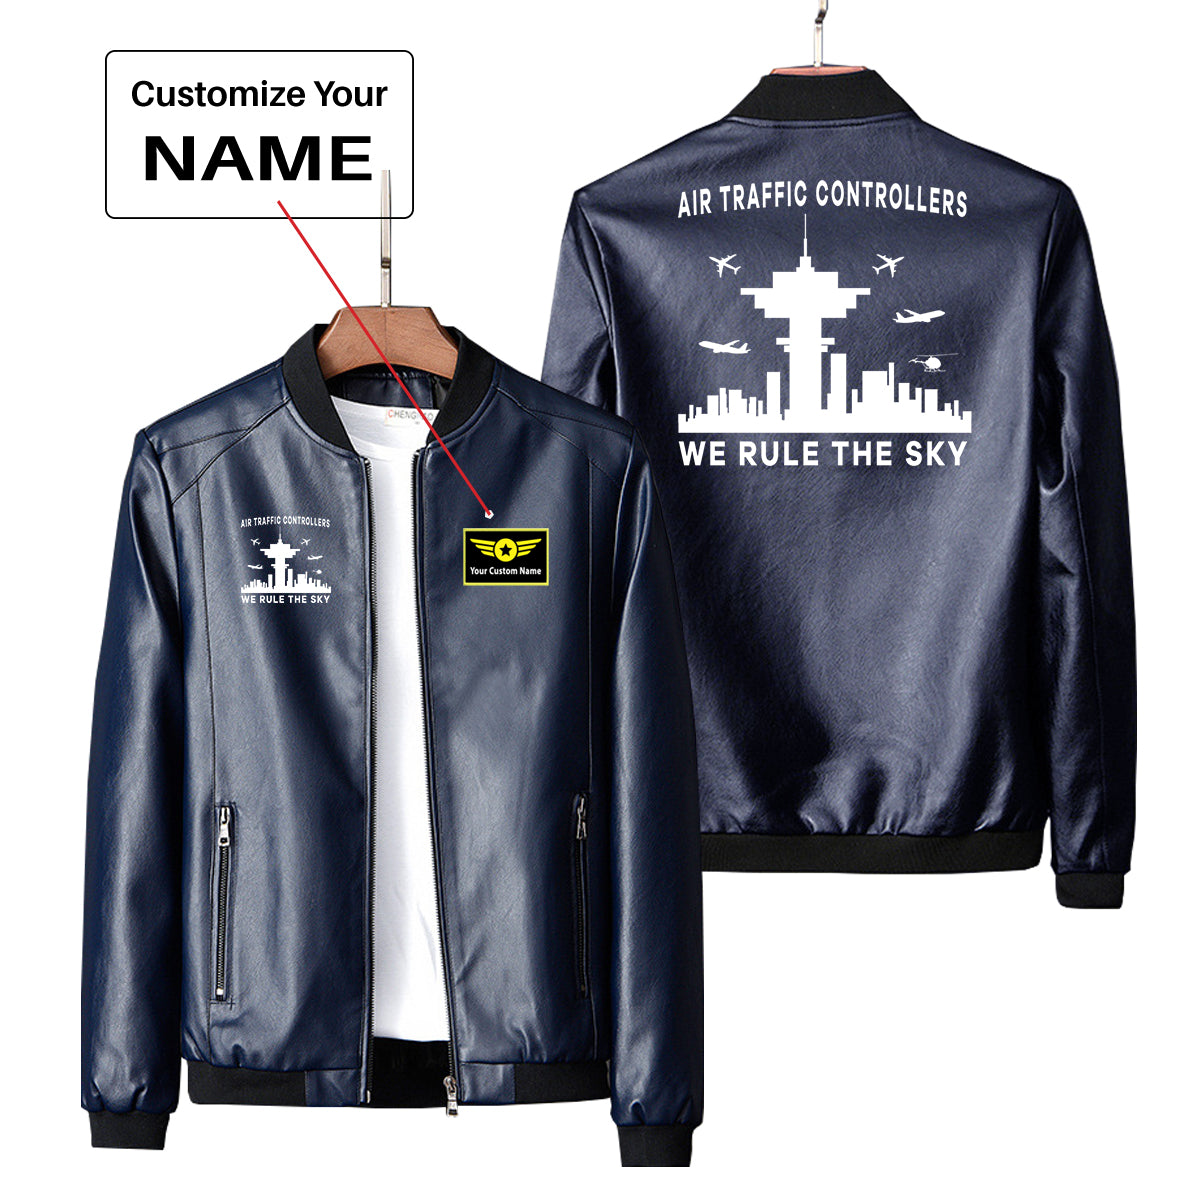 Air Traffic Controllers - We Rule The Sky Designed PU Leather Jackets